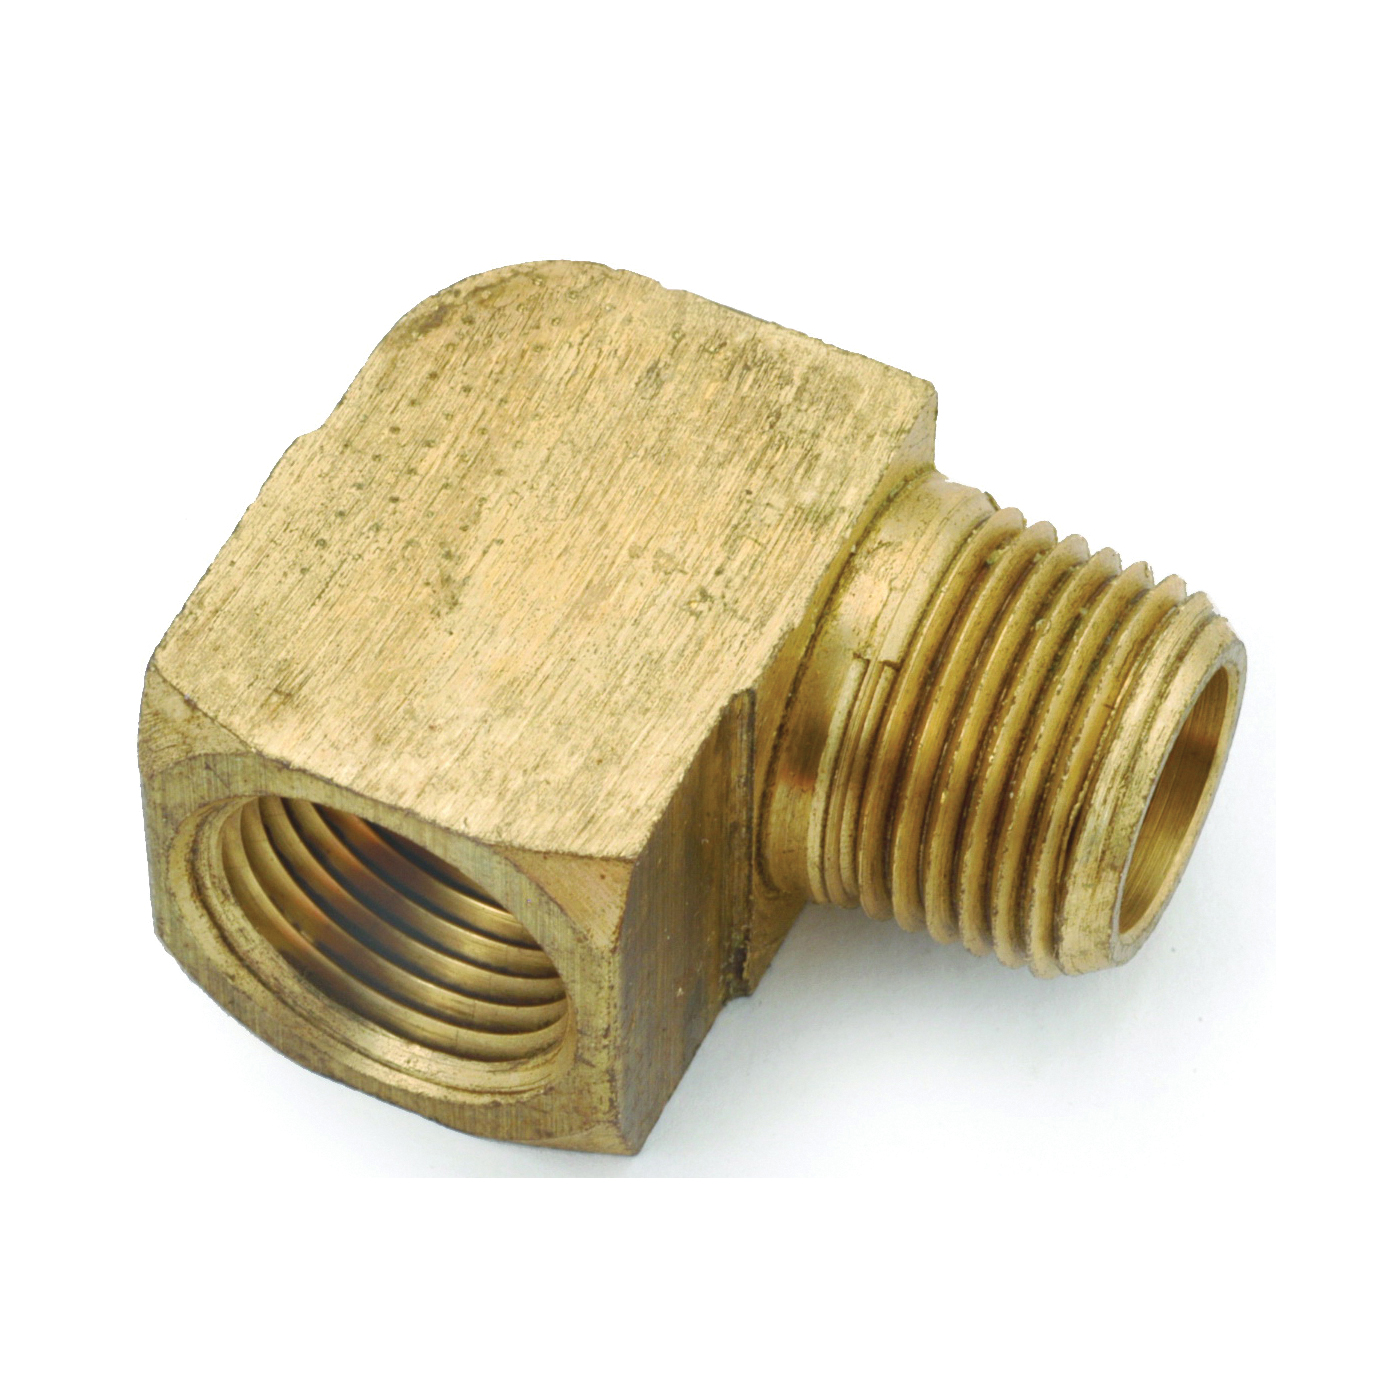 Anderson Metals 738116-12 3/4-Inch Low Lead Brass 90-Degree Angle Street Elbow, 